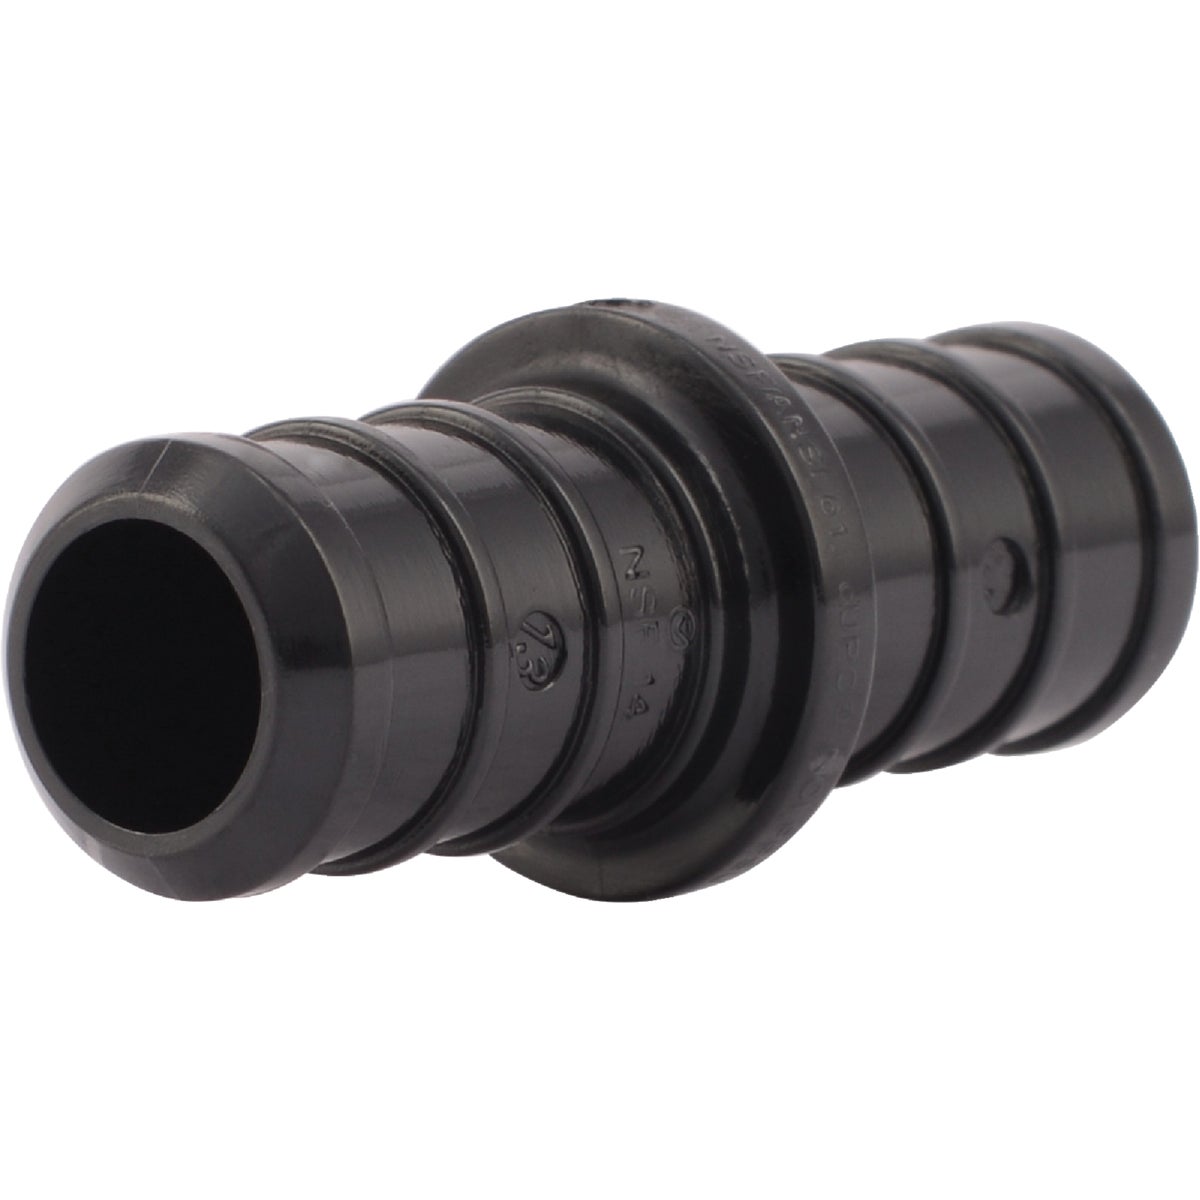 Item 451852, The SharkBite PEX Poly Alloy Barb Coupling is an easy to install, low-cost 